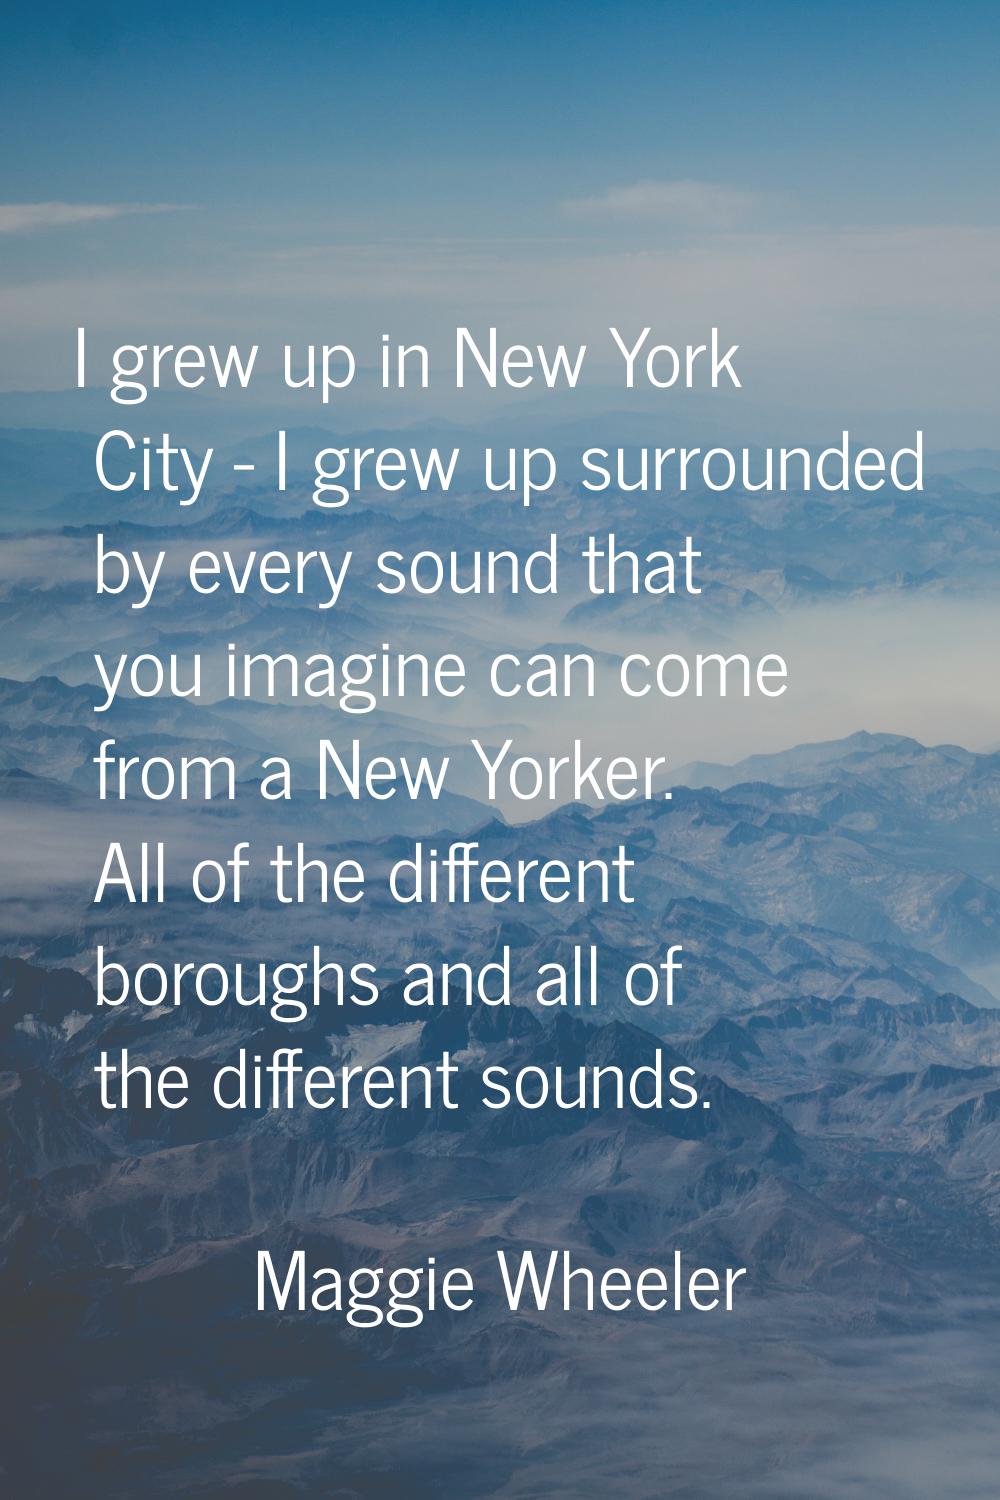 I grew up in New York City - I grew up surrounded by every sound that you imagine can come from a N